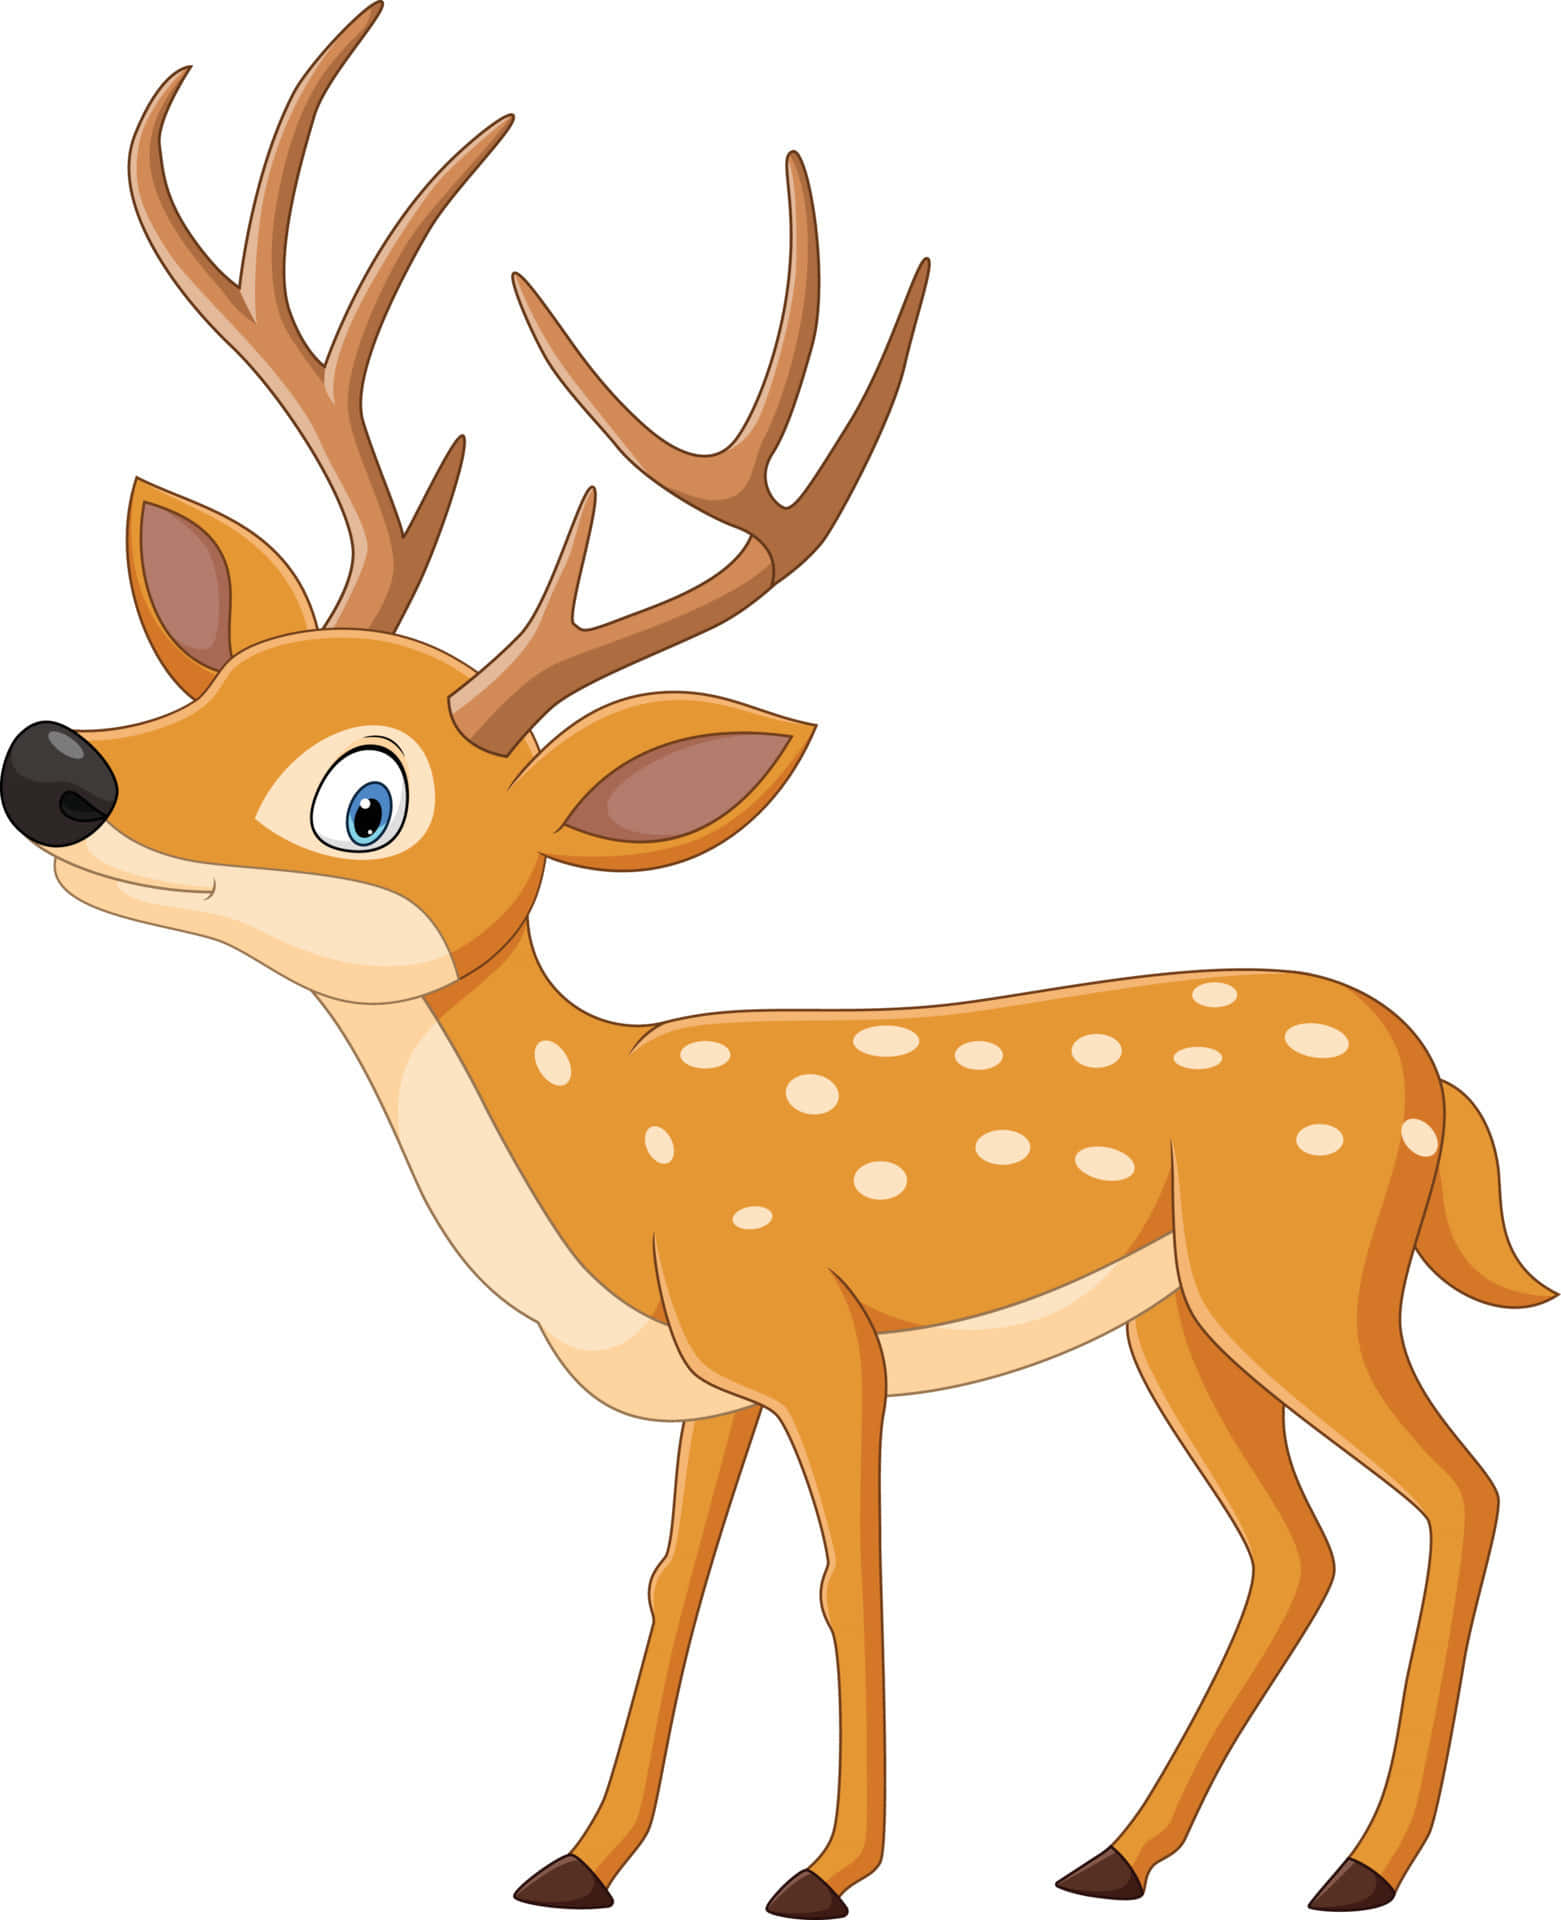 Funny Deer Cartoon On White Picture